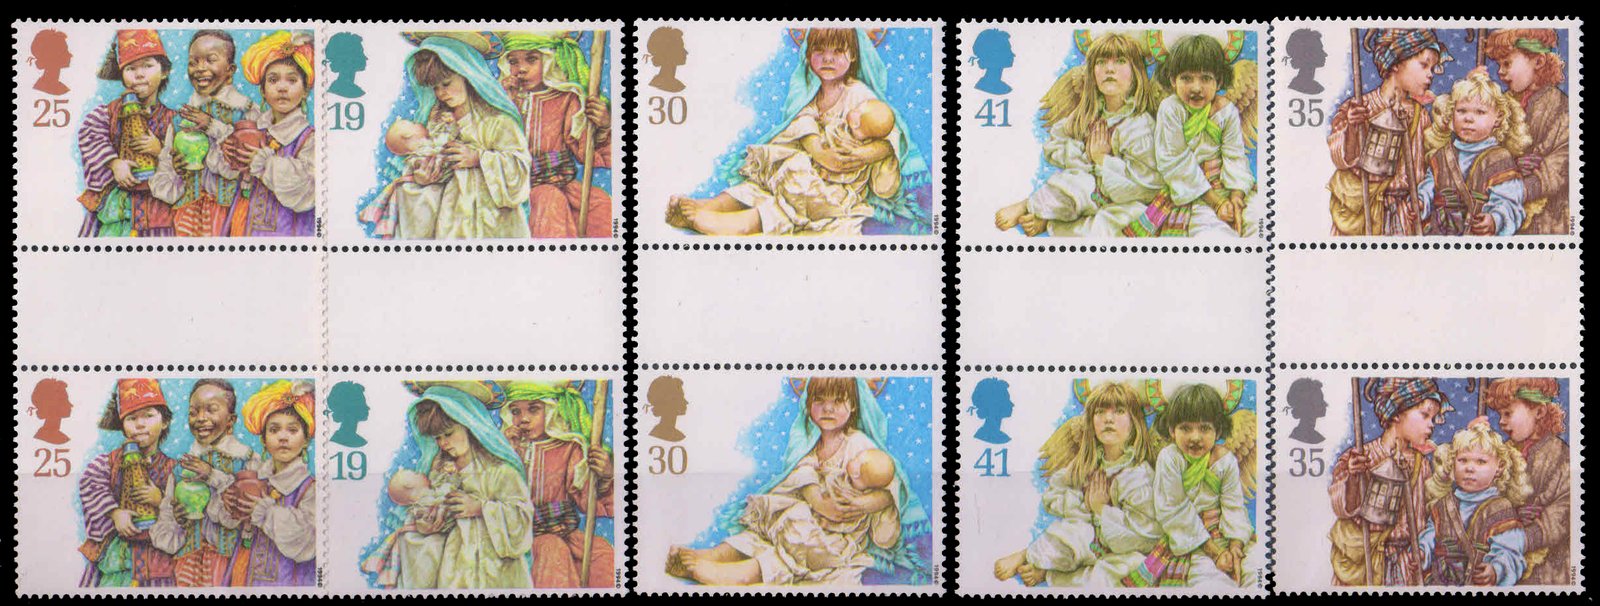 GREAT BRITAIN 1994-Christmas, Children Nativity plays, Set of 5 Stamps with Gutter Pairs, MNH, S.G. 1843-1847